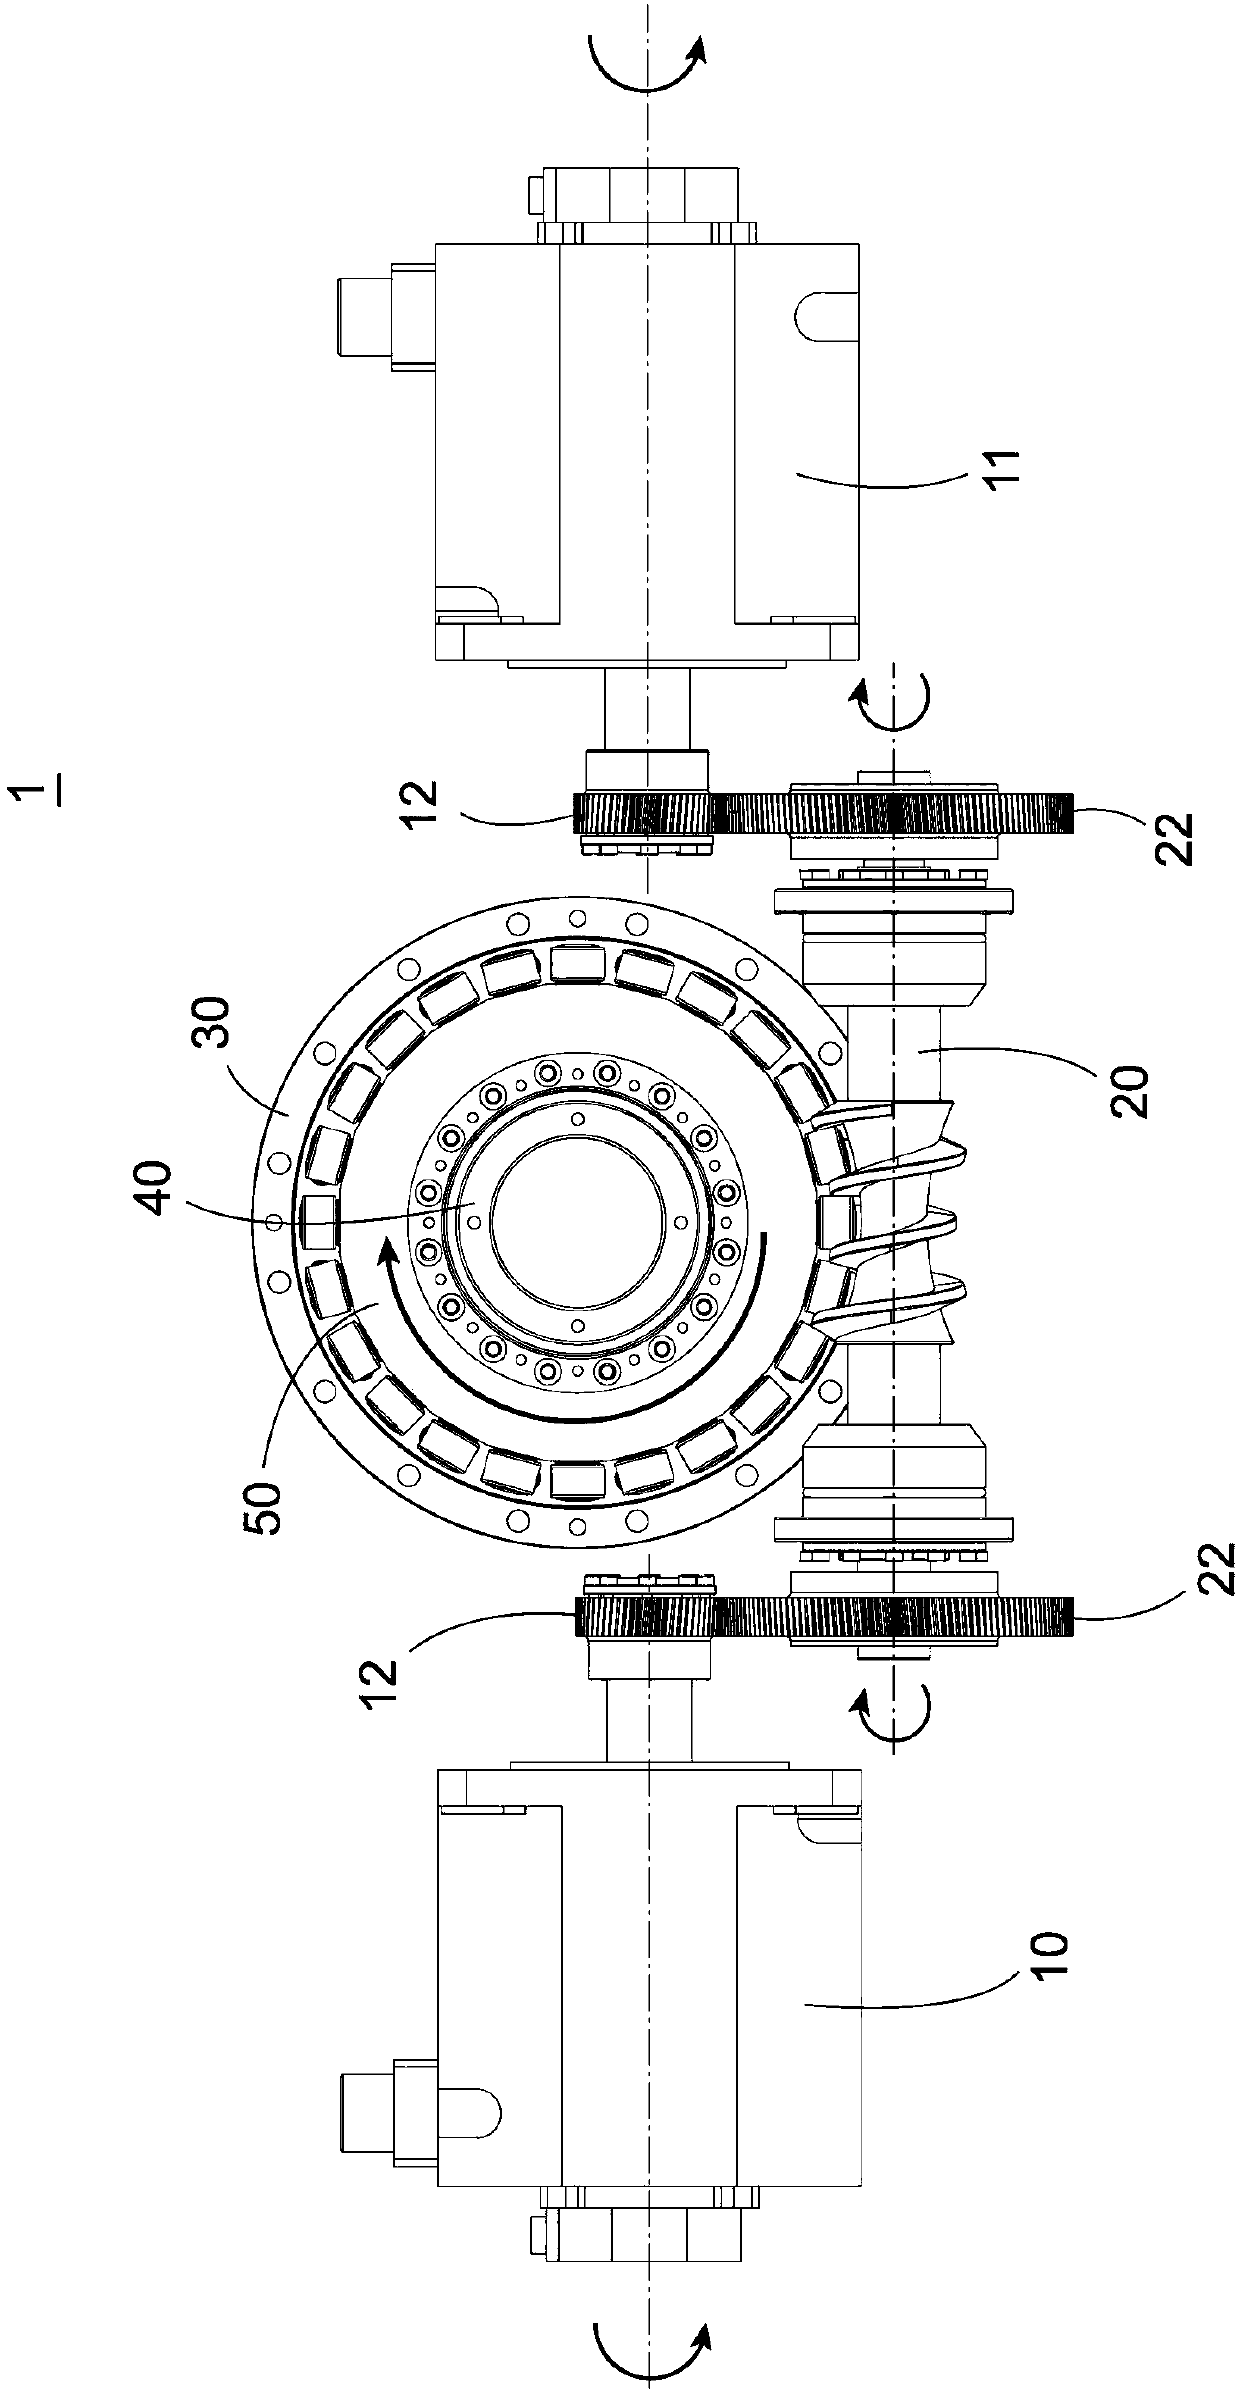 Double-drive structure of roller cam single-output shaft